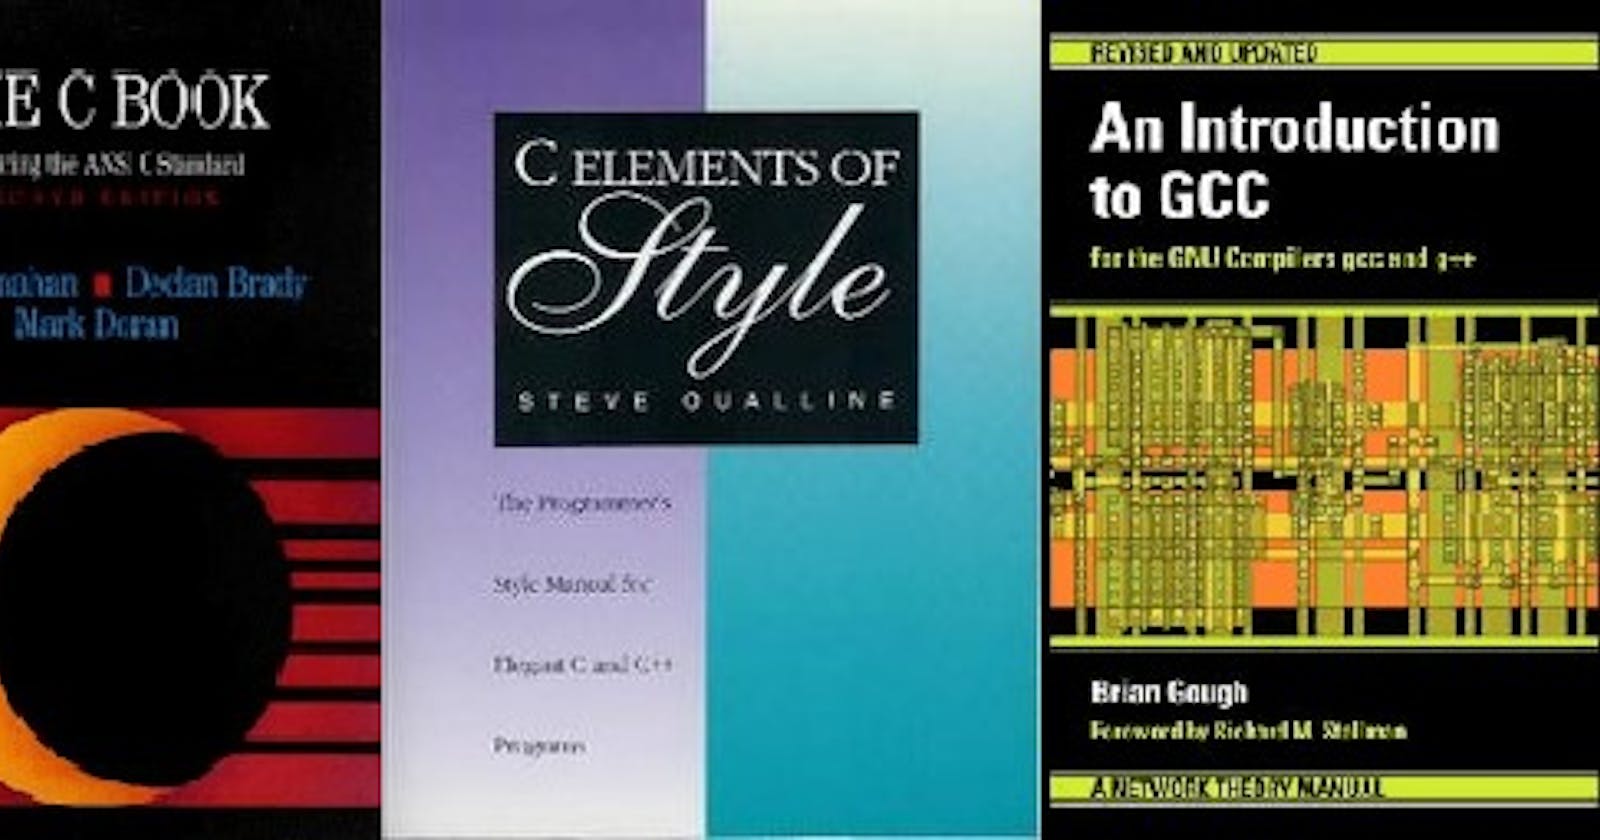 Learn C Programming With 9 Excellent Open Source Books - OSS Blog